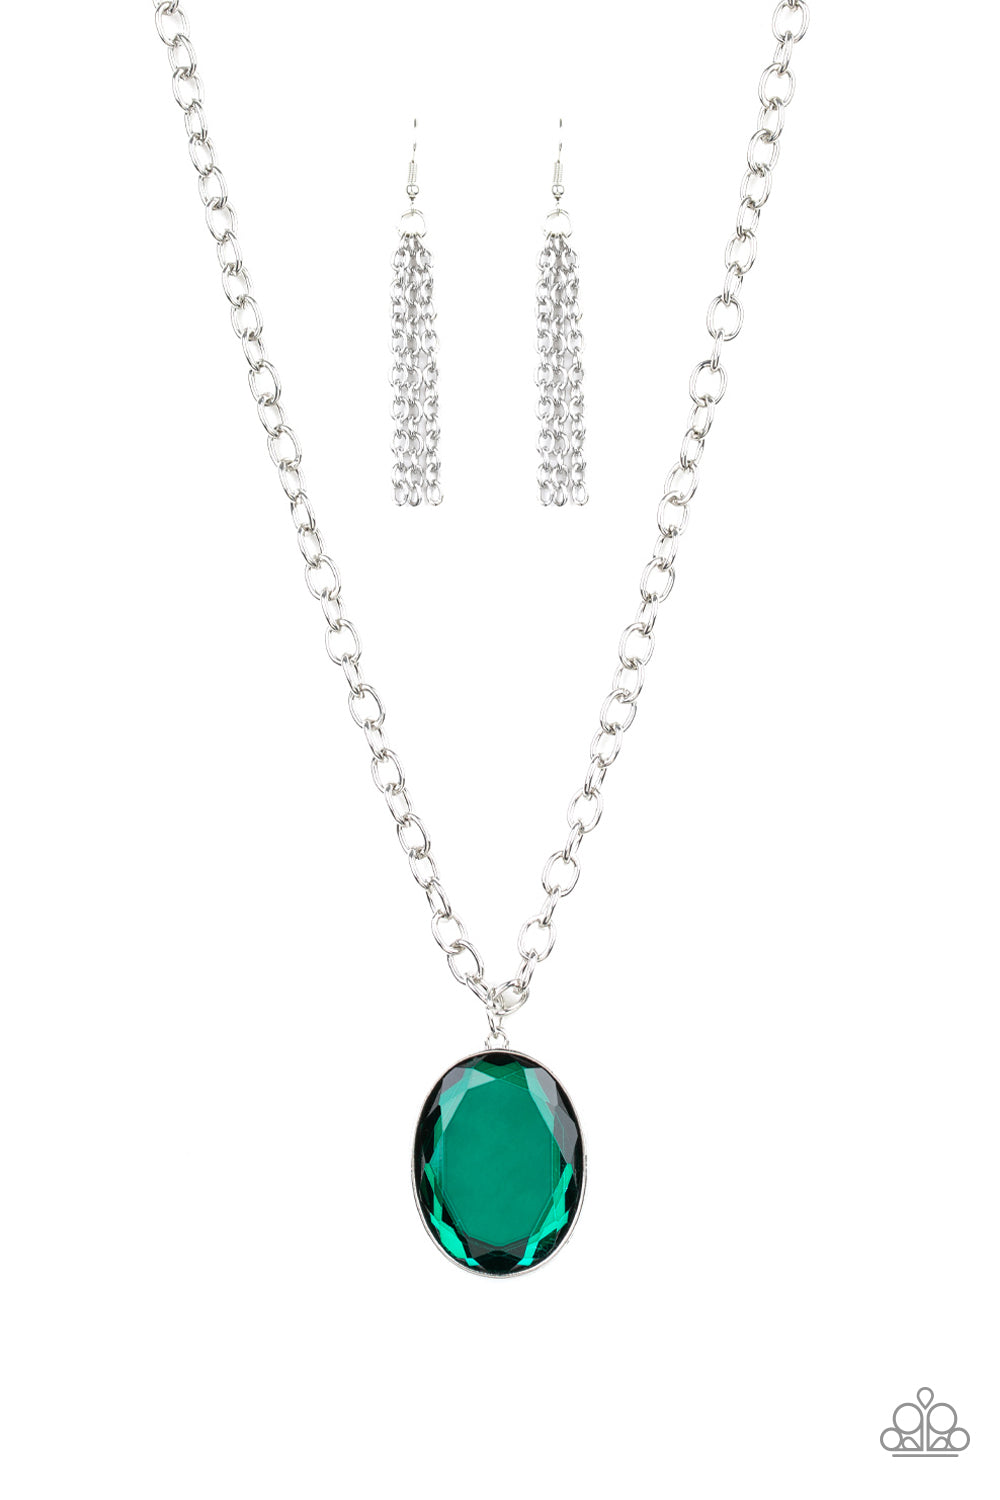 shop-sassy-affordable- green-necklace-6-336-1018-paparazzi-accessories